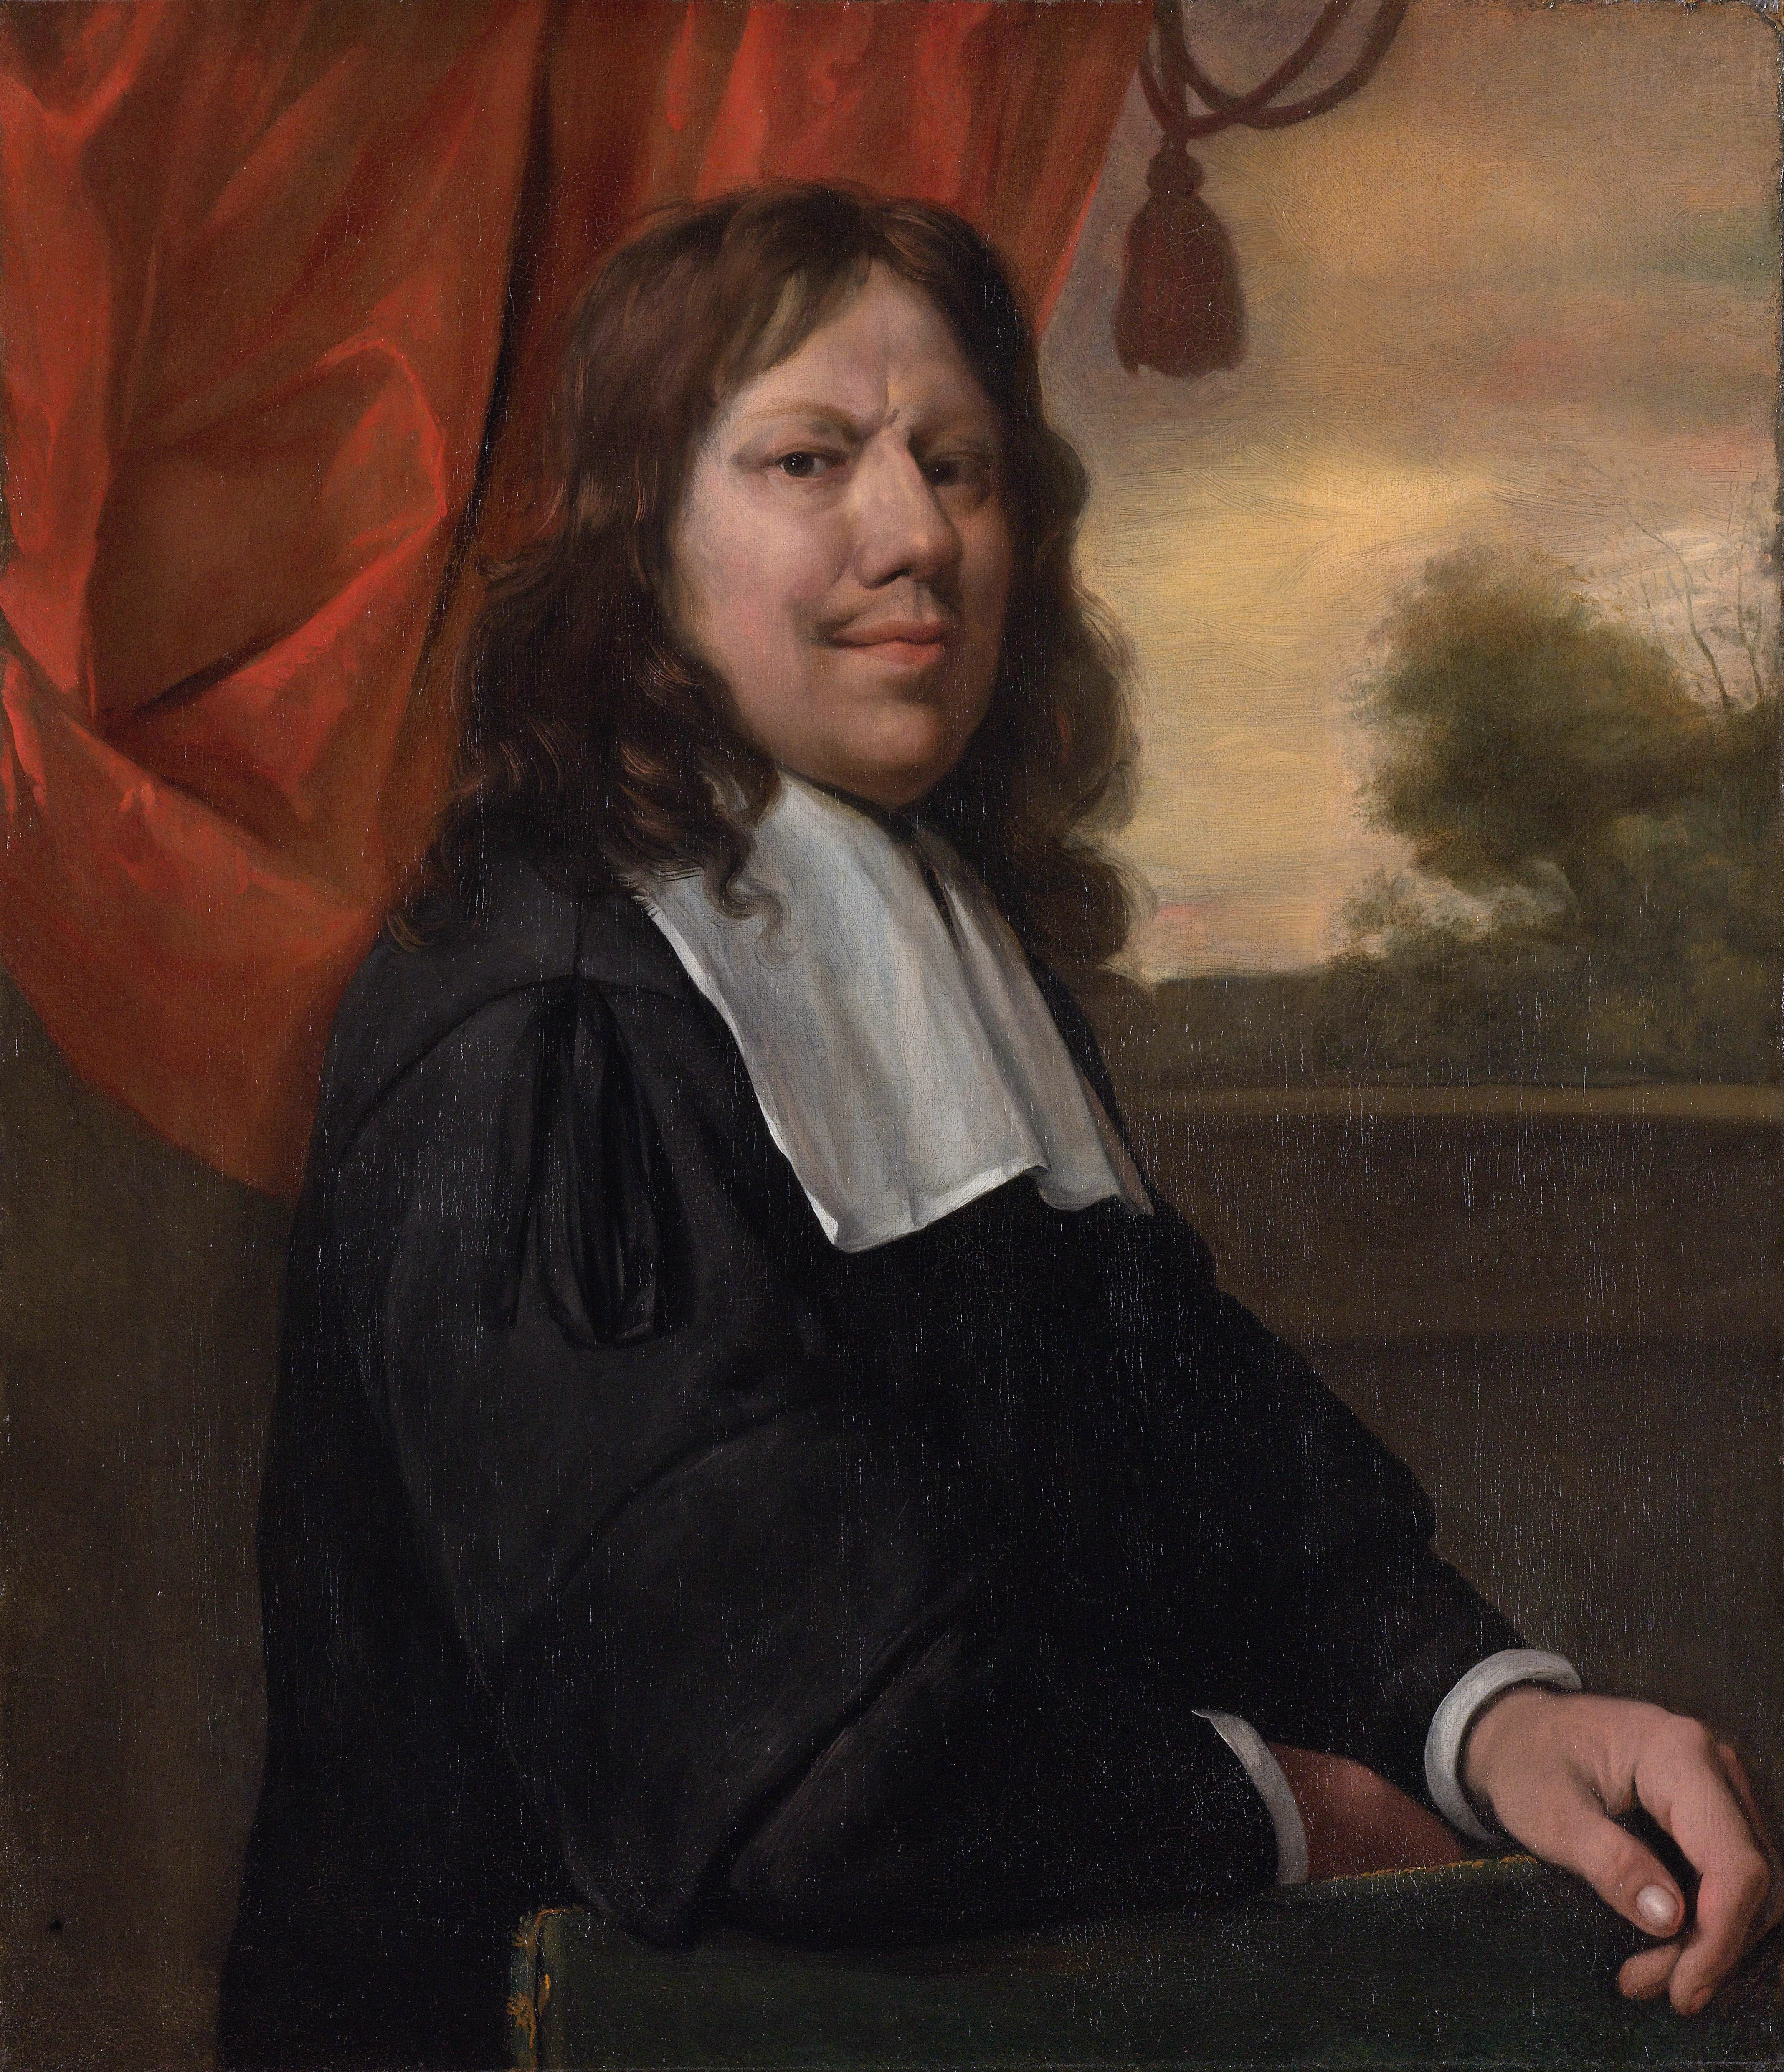 In His Biblical Scenes, the 17th-Century Dutch Painter Jan Steen Rivals Rembrandt Himself